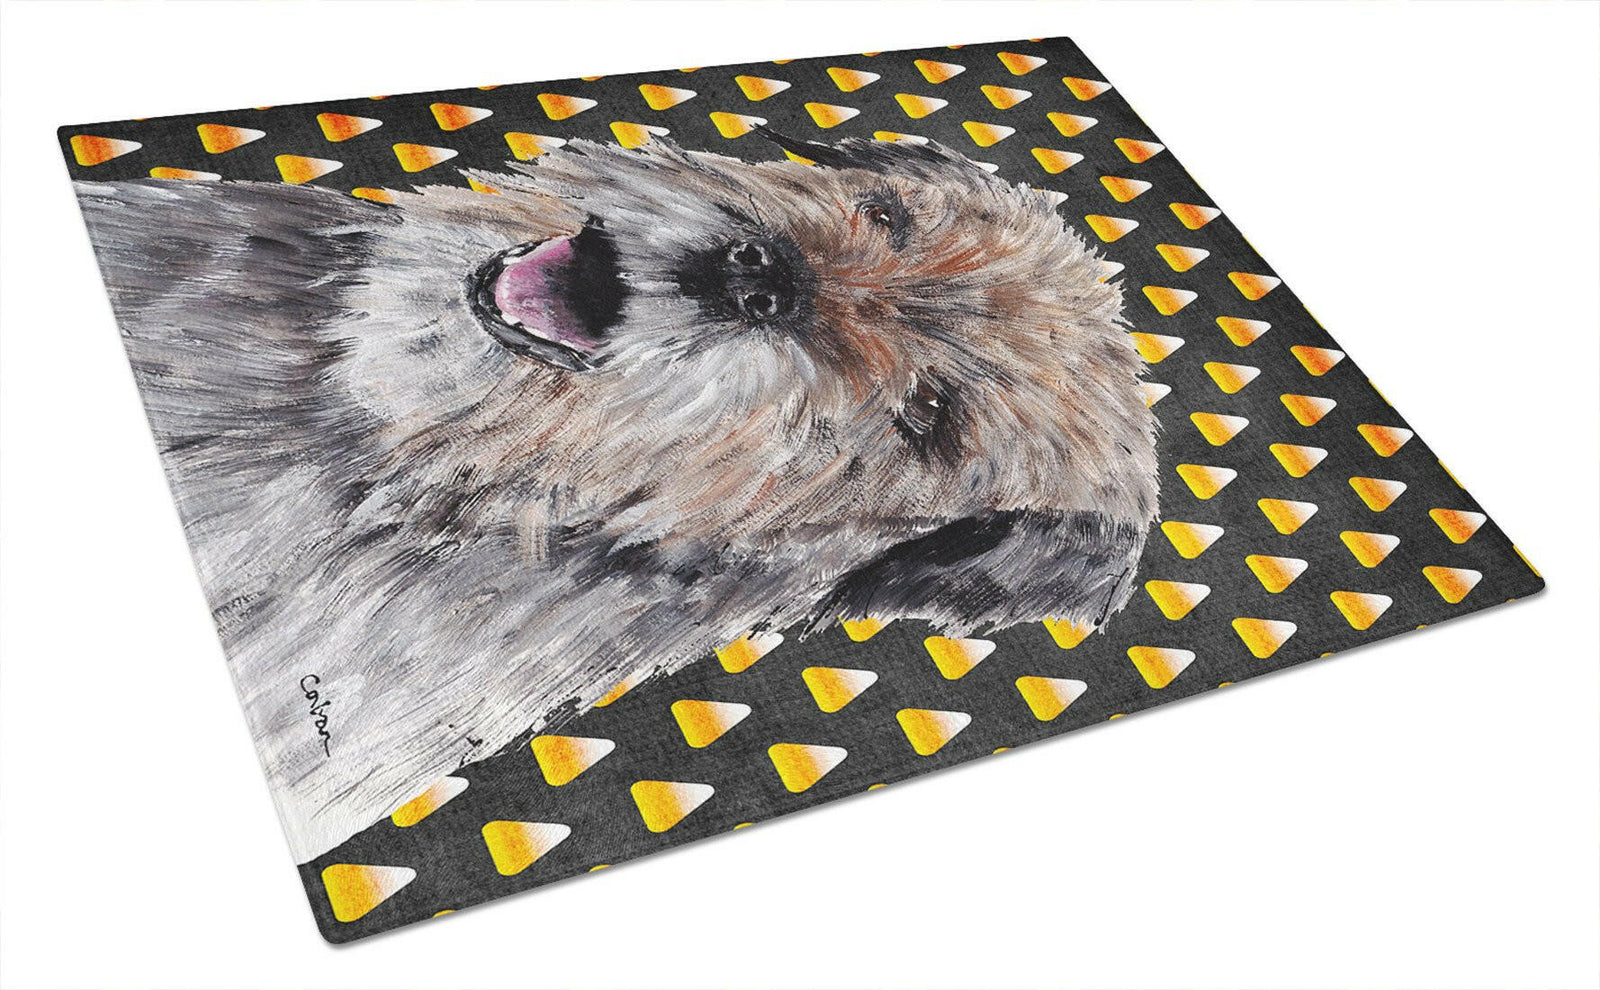 Border Terrier Halloween Candy Corn Glass Cutting Board Large by Caroline's Treasures